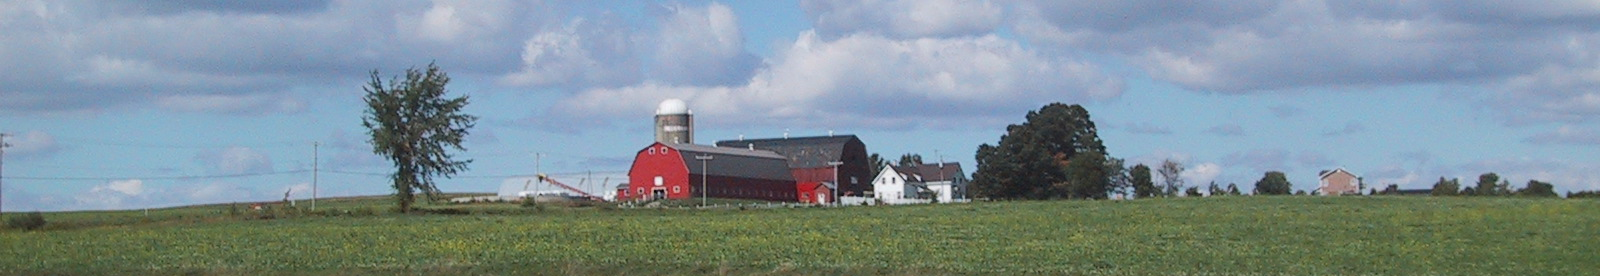 Red Barn on Farm in Distance